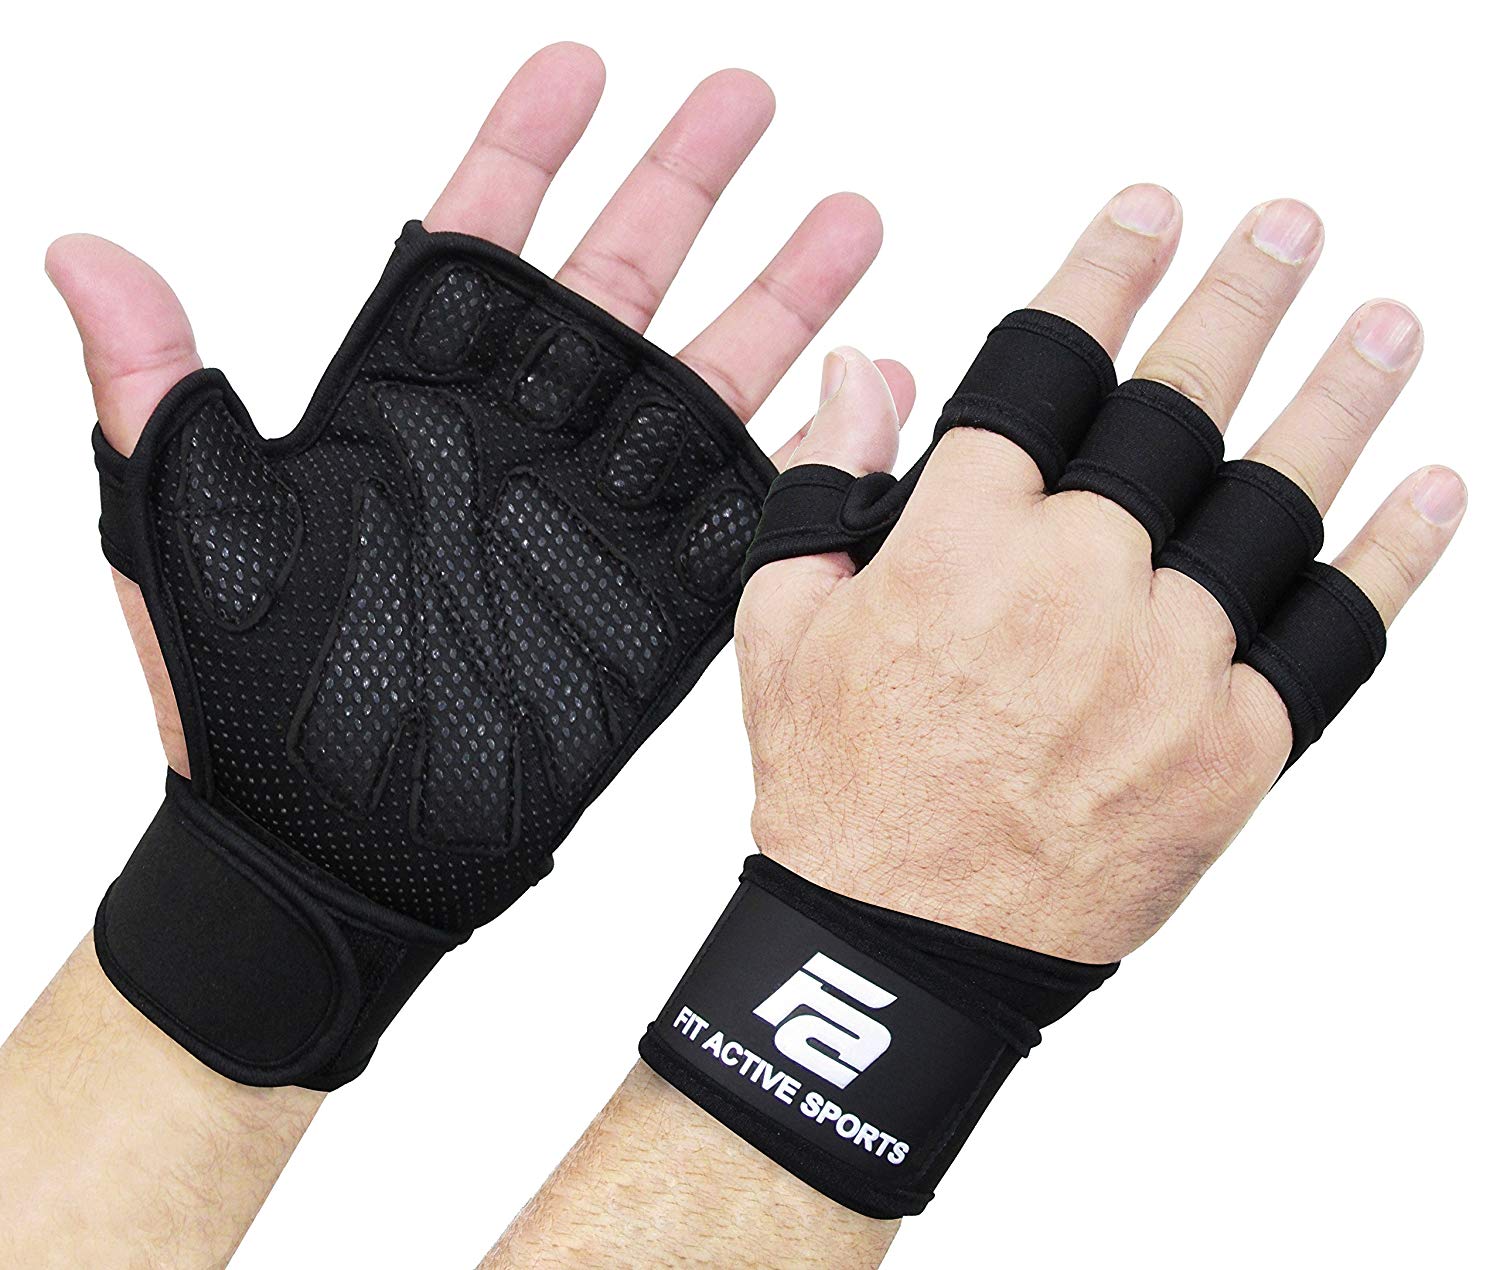  New Ventilated Weight Lifting Gloves 